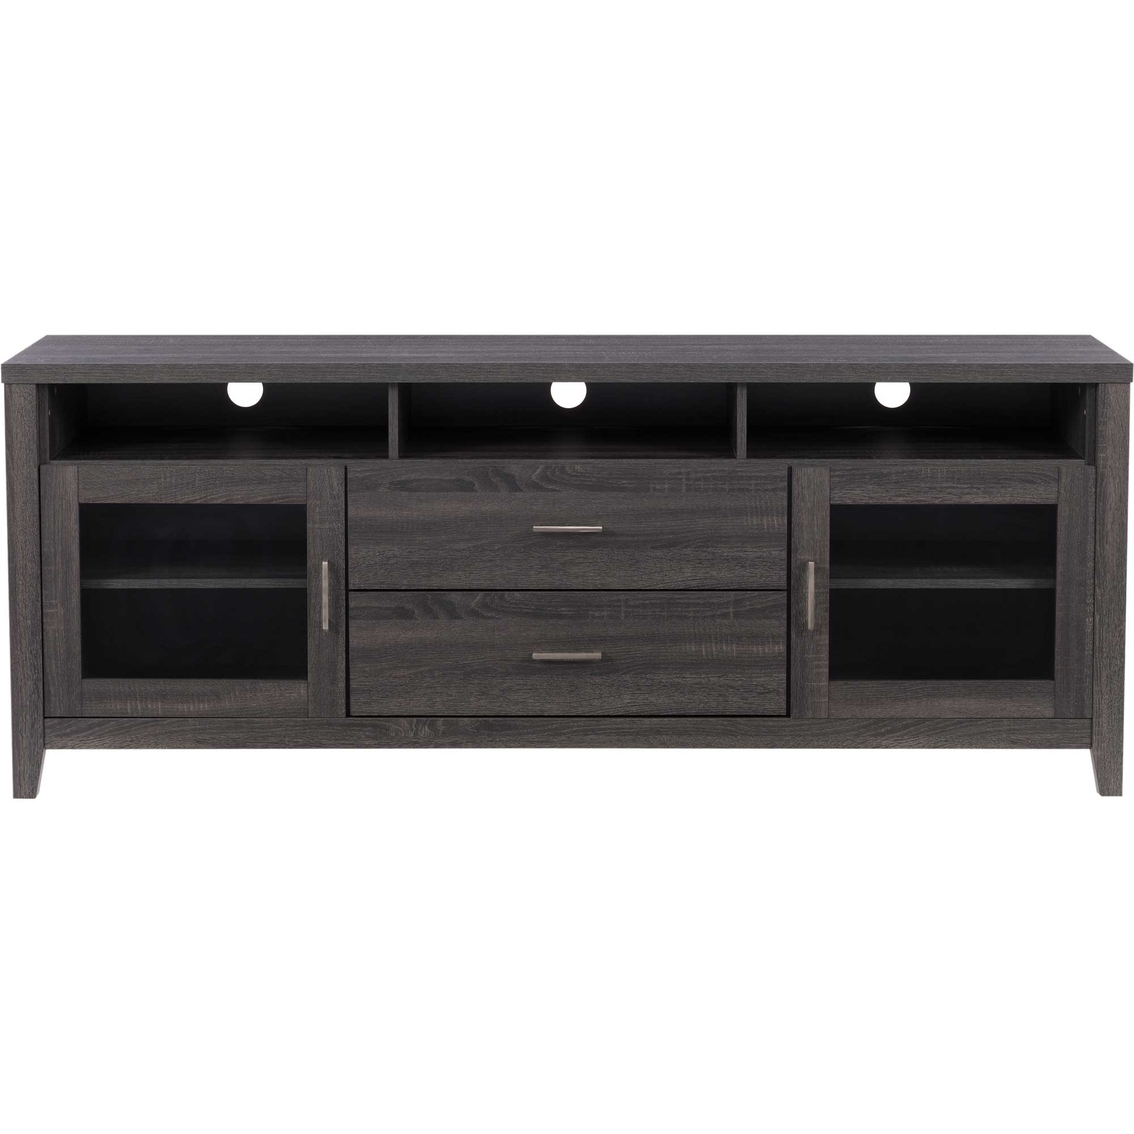 Corliving Hollywood Dark Grey TV Cabinet with Drawers for TVs up to 85 in. - Image 2 of 8